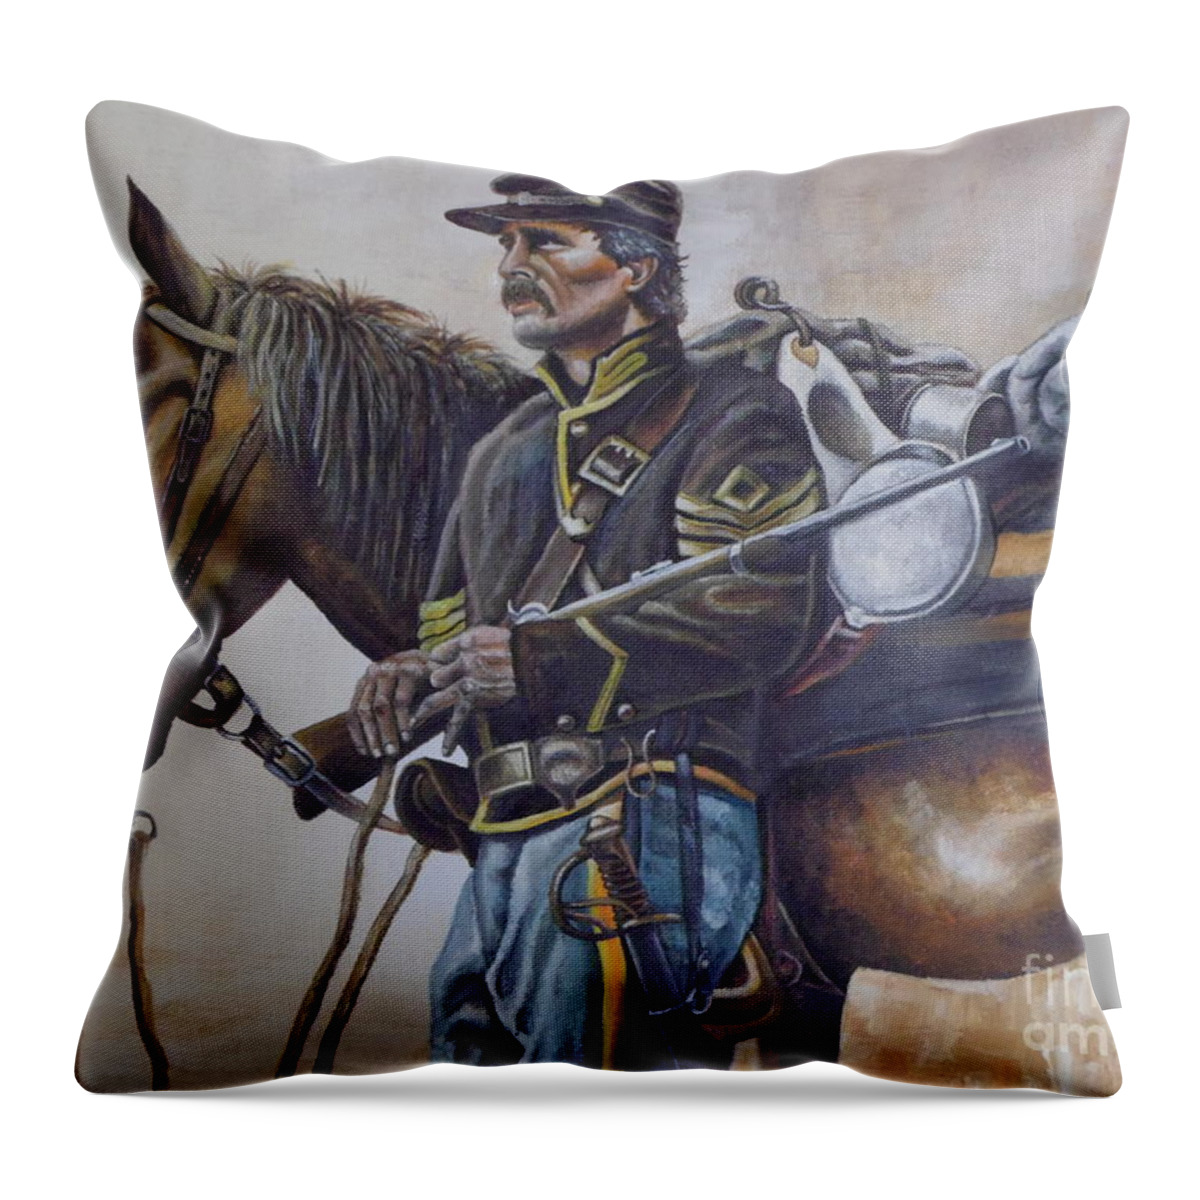 A Union Cavalry Soldier With His Horse And Rifle. The Union Soldier Is A First Sargent Standing Next To His Horse. Throw Pillow featuring the painting Union Cavalry by Martin Schmidt